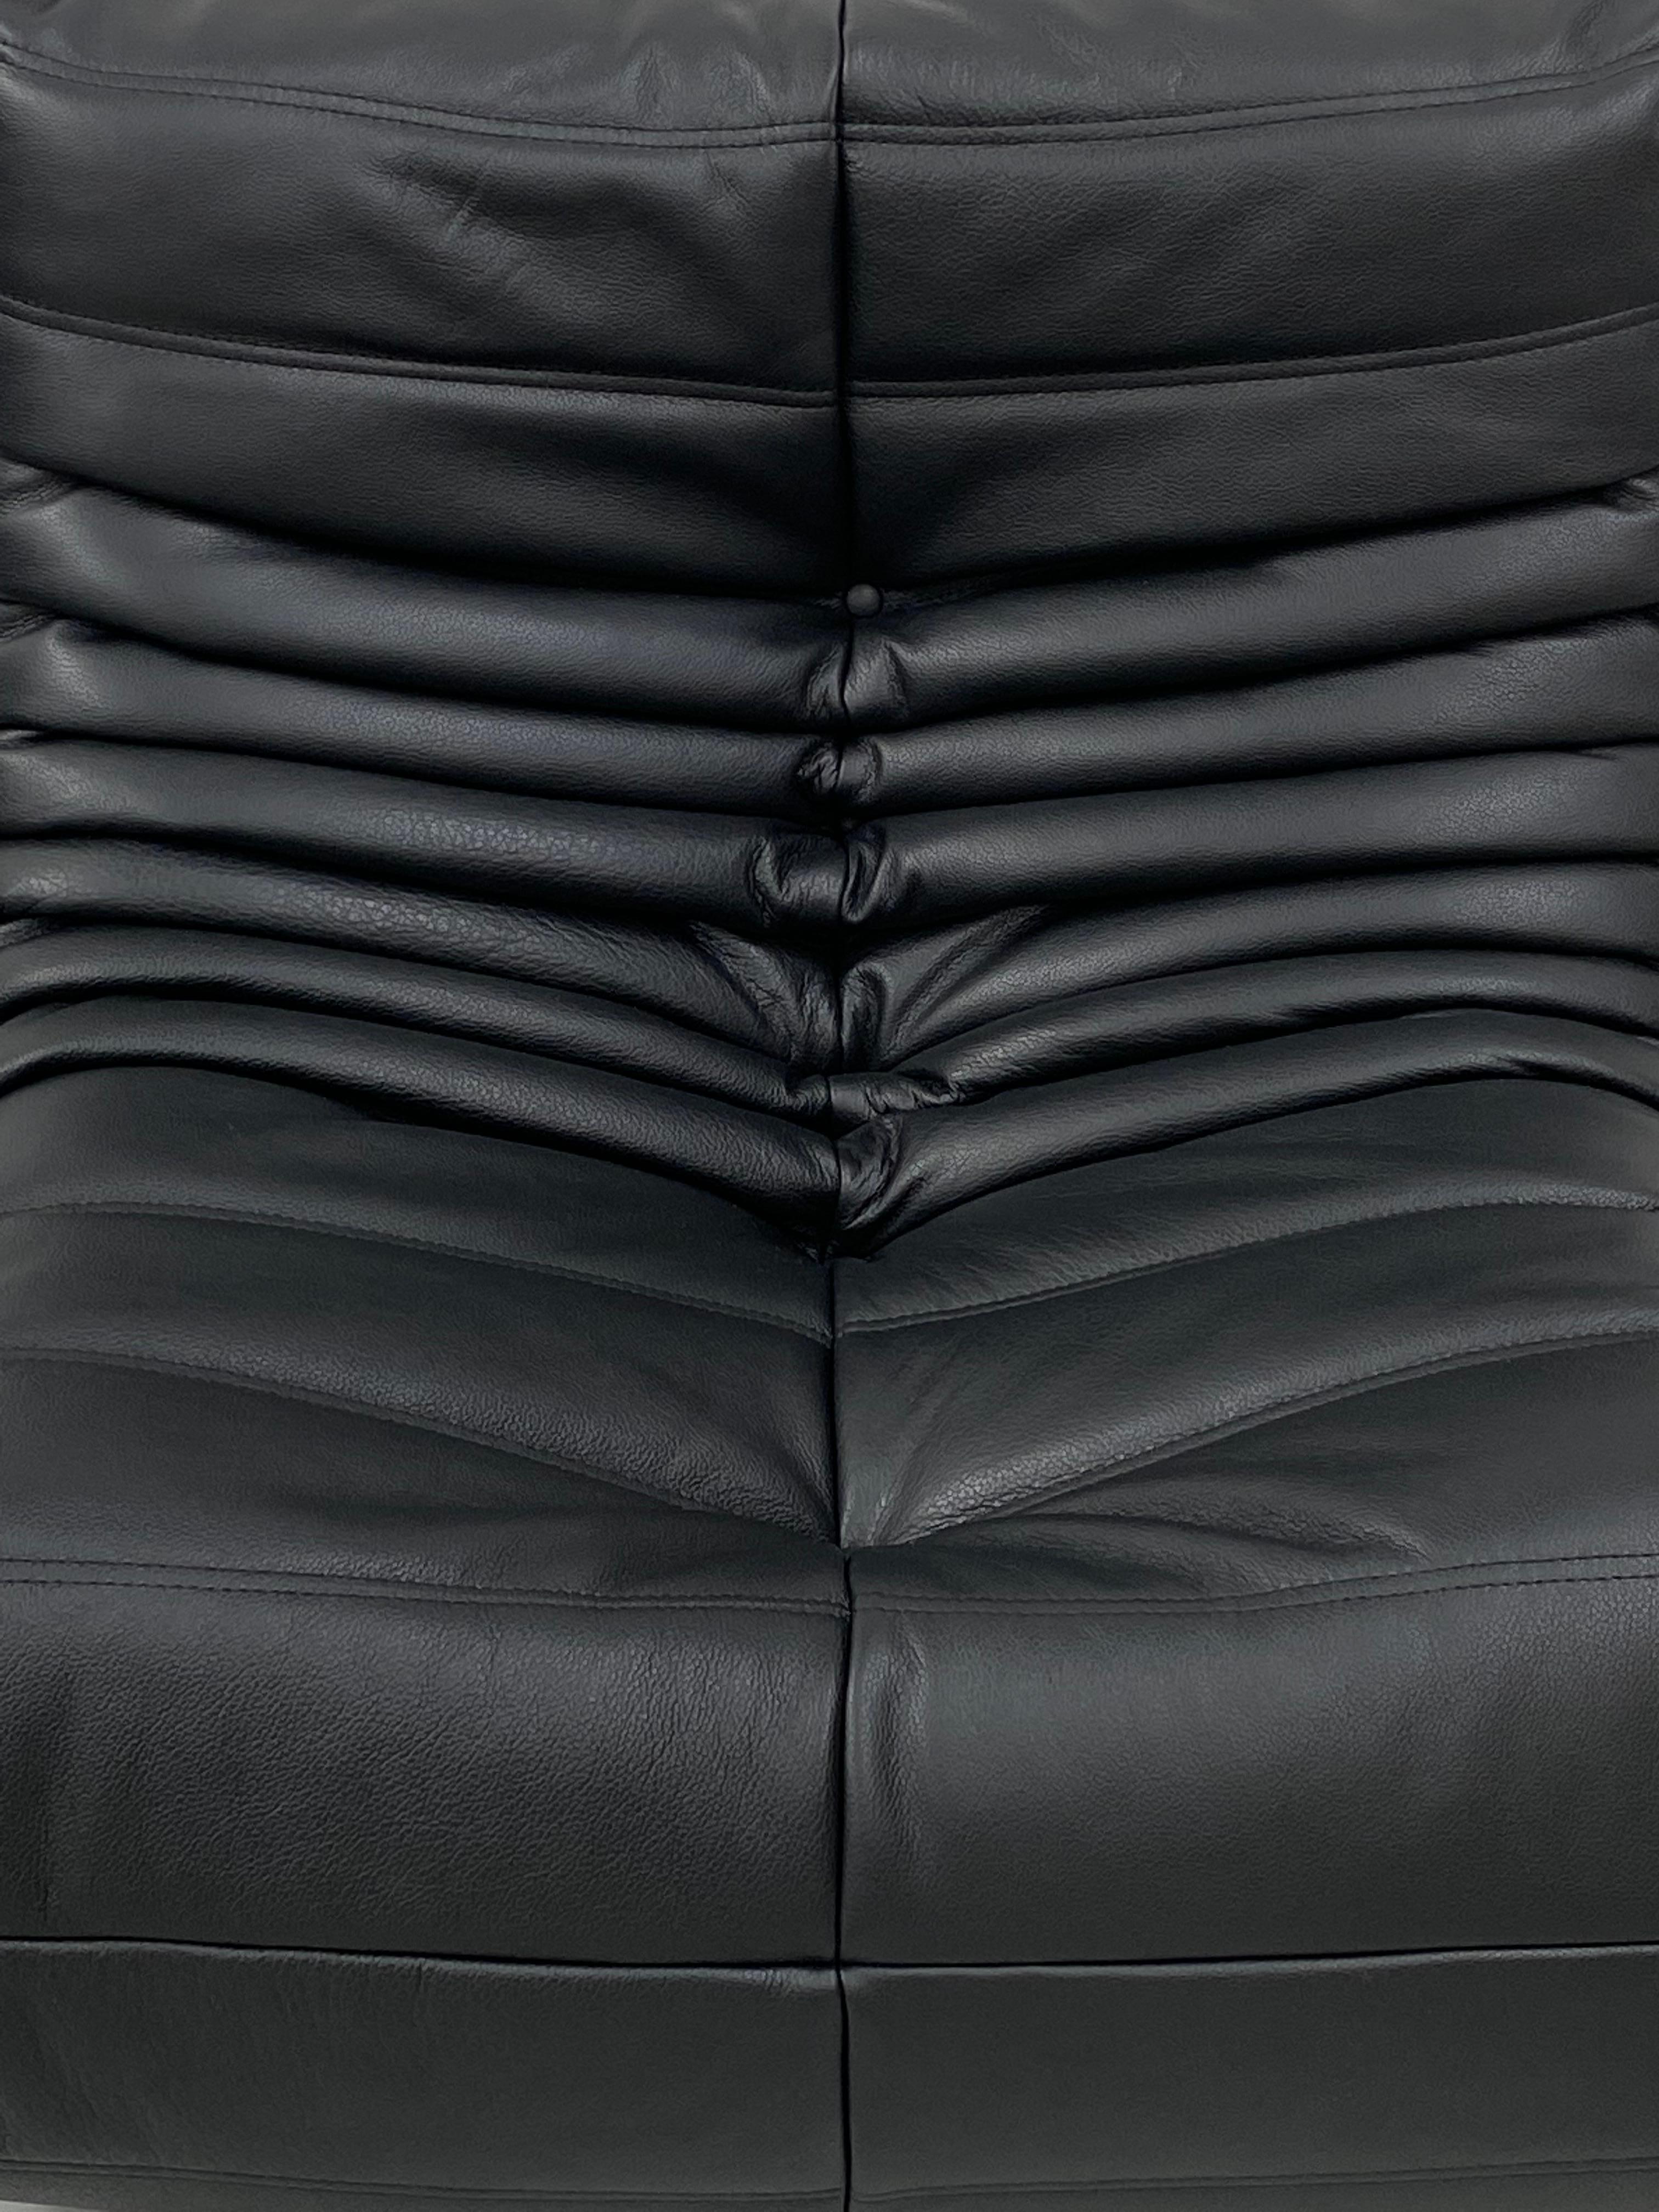 French Togo Chair in Black Leather by Michel Ducaroy for Ligne Roset. For Sale 2